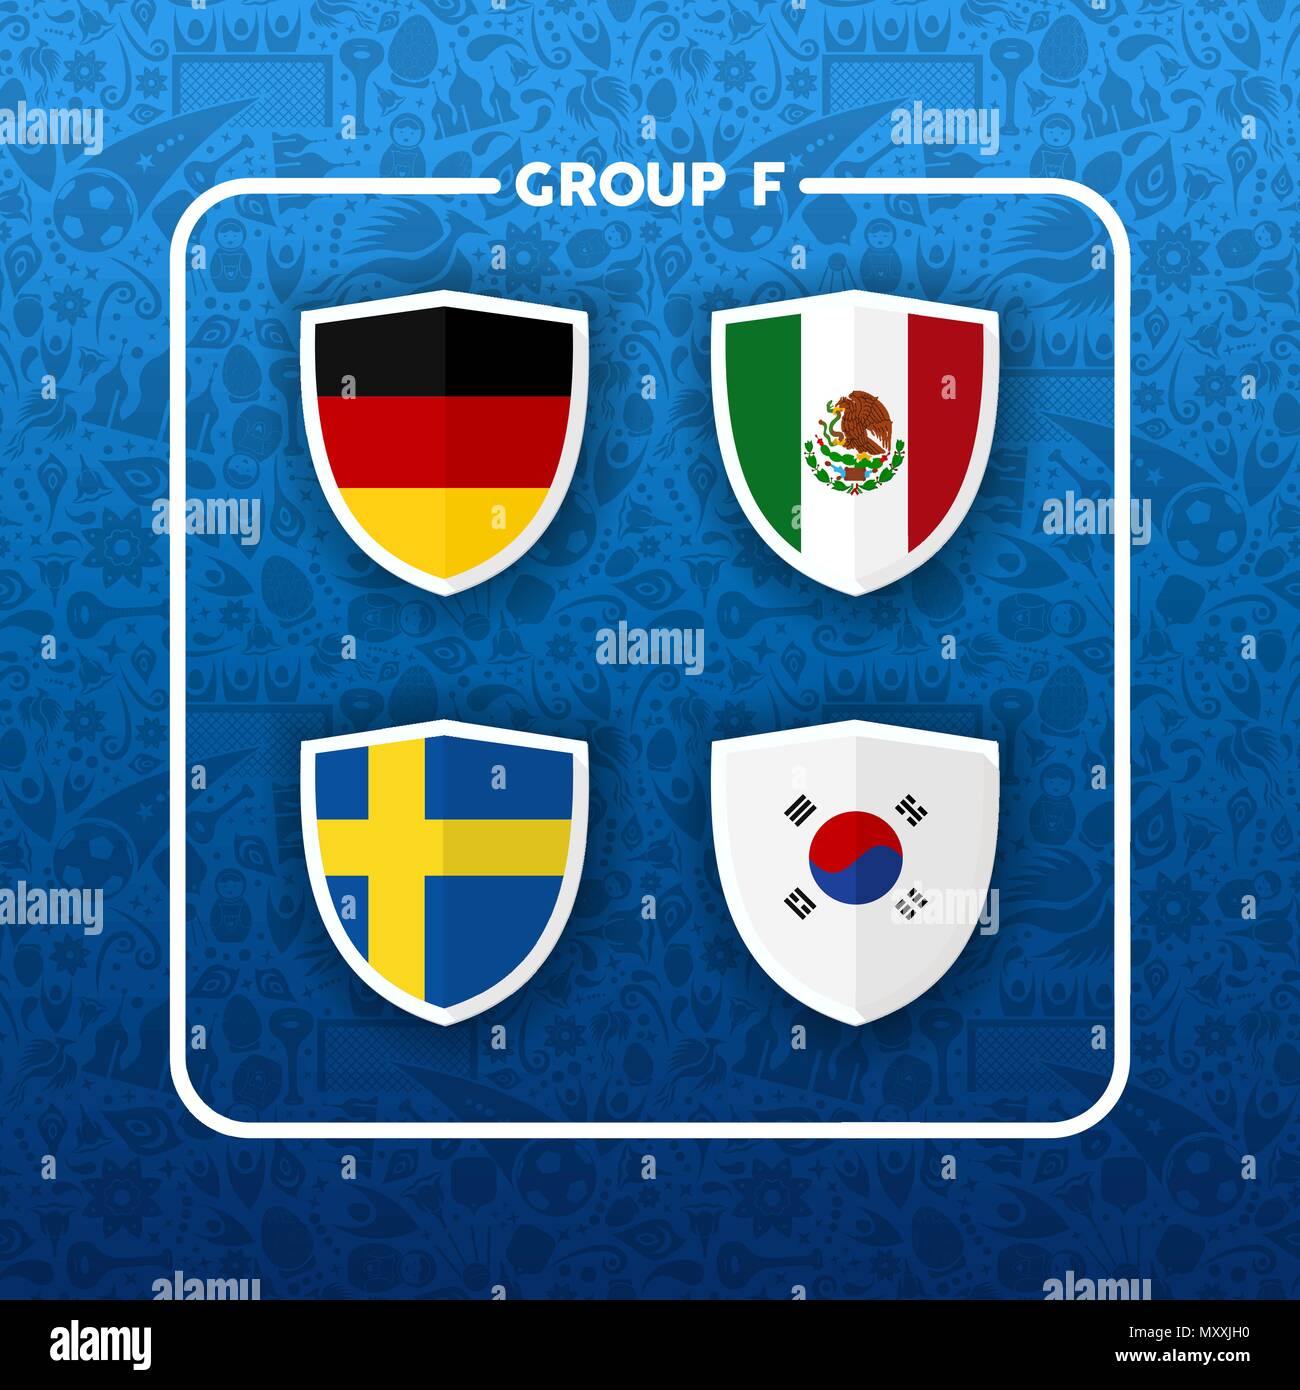 Soccer championship event schedule for 2018. Group F country team list of football match games. Includes Germany, Korea, Mexico and Sweden. EPS10 vect Stock Vector